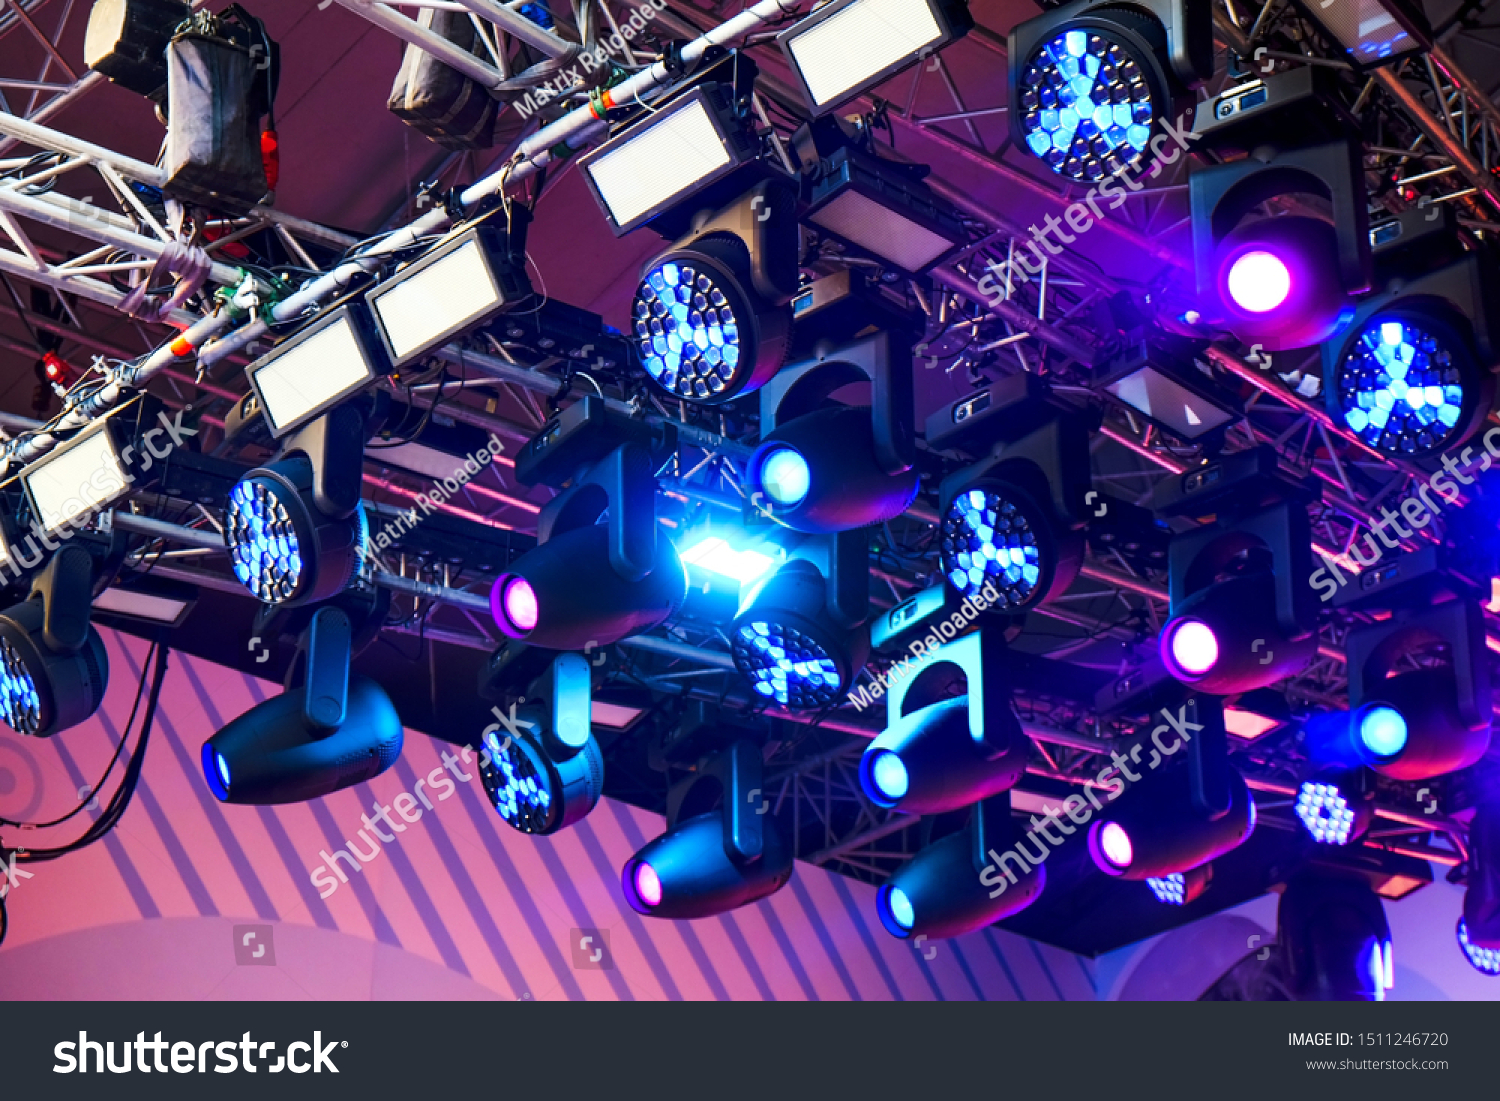 Set of professional stage lighting equipment for gig illumination.Floodlights,several powerful stage light,used to illuminate also sports field,stage,exterior of building.Stage illumination.SOFT FOCUS #1511246720